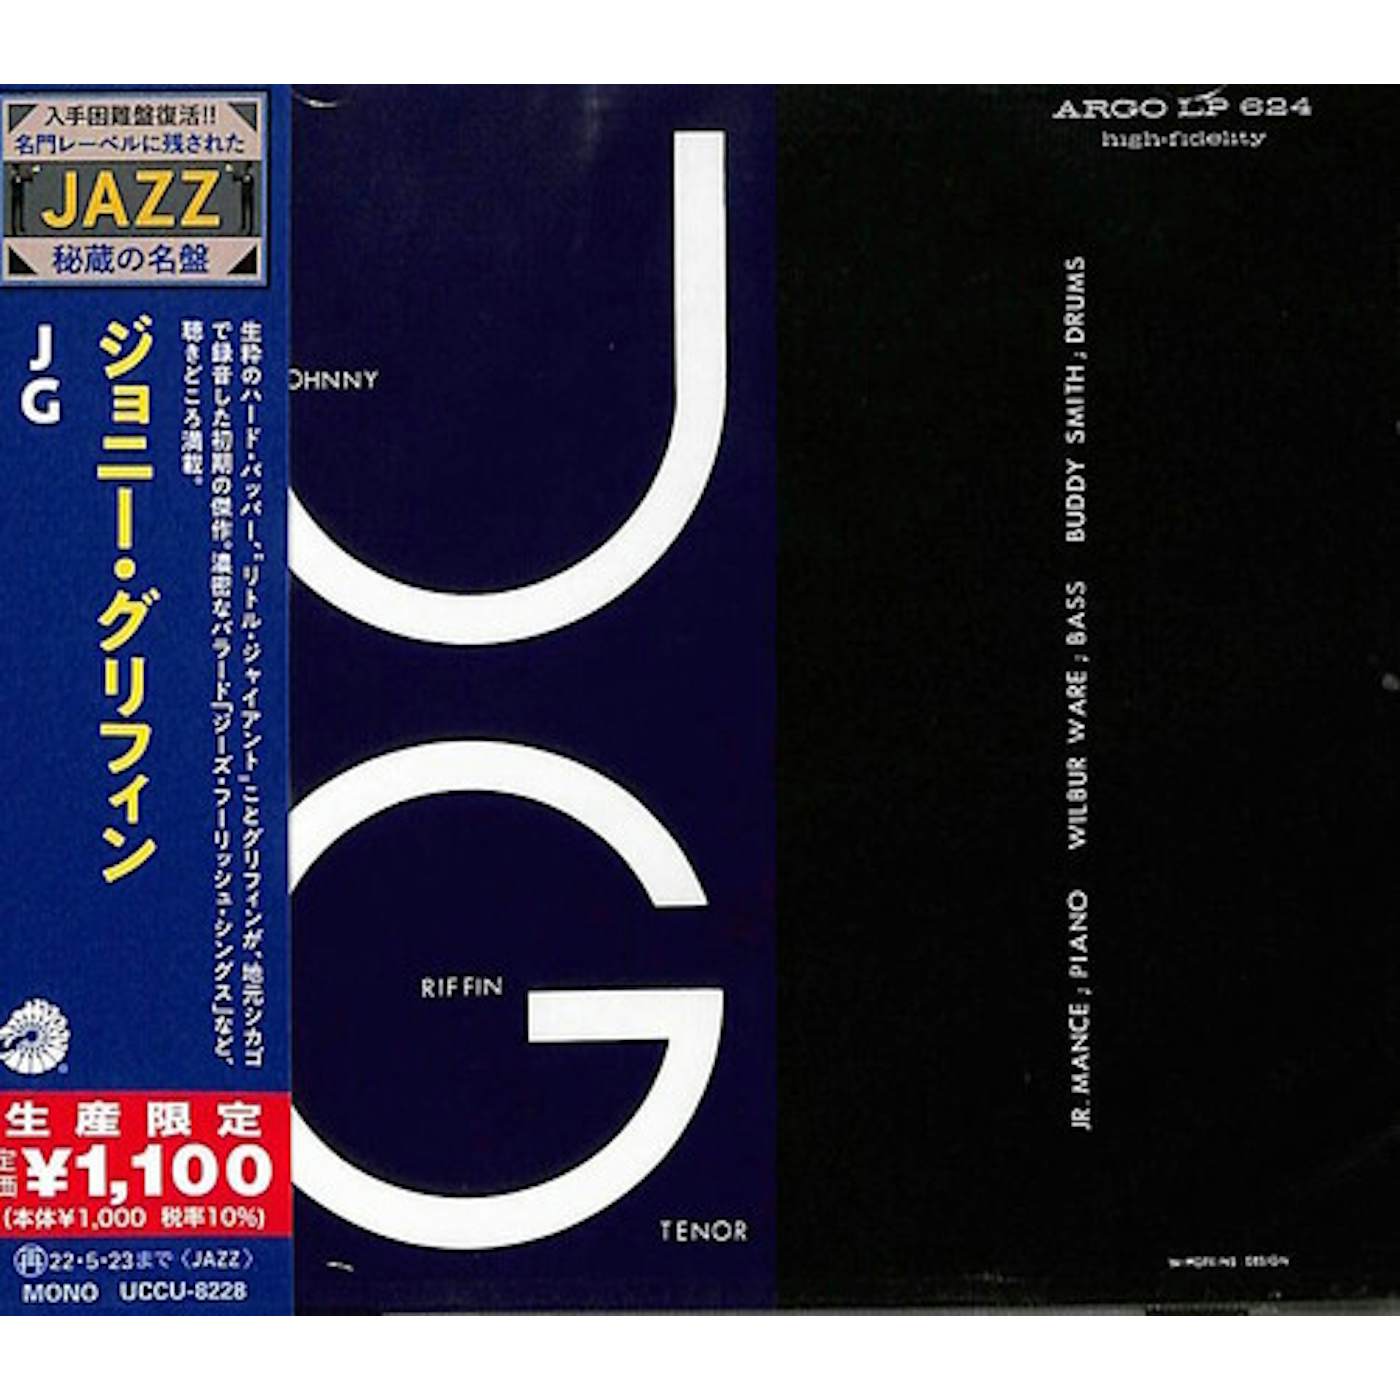 JOHNNY GRIFFIN CD